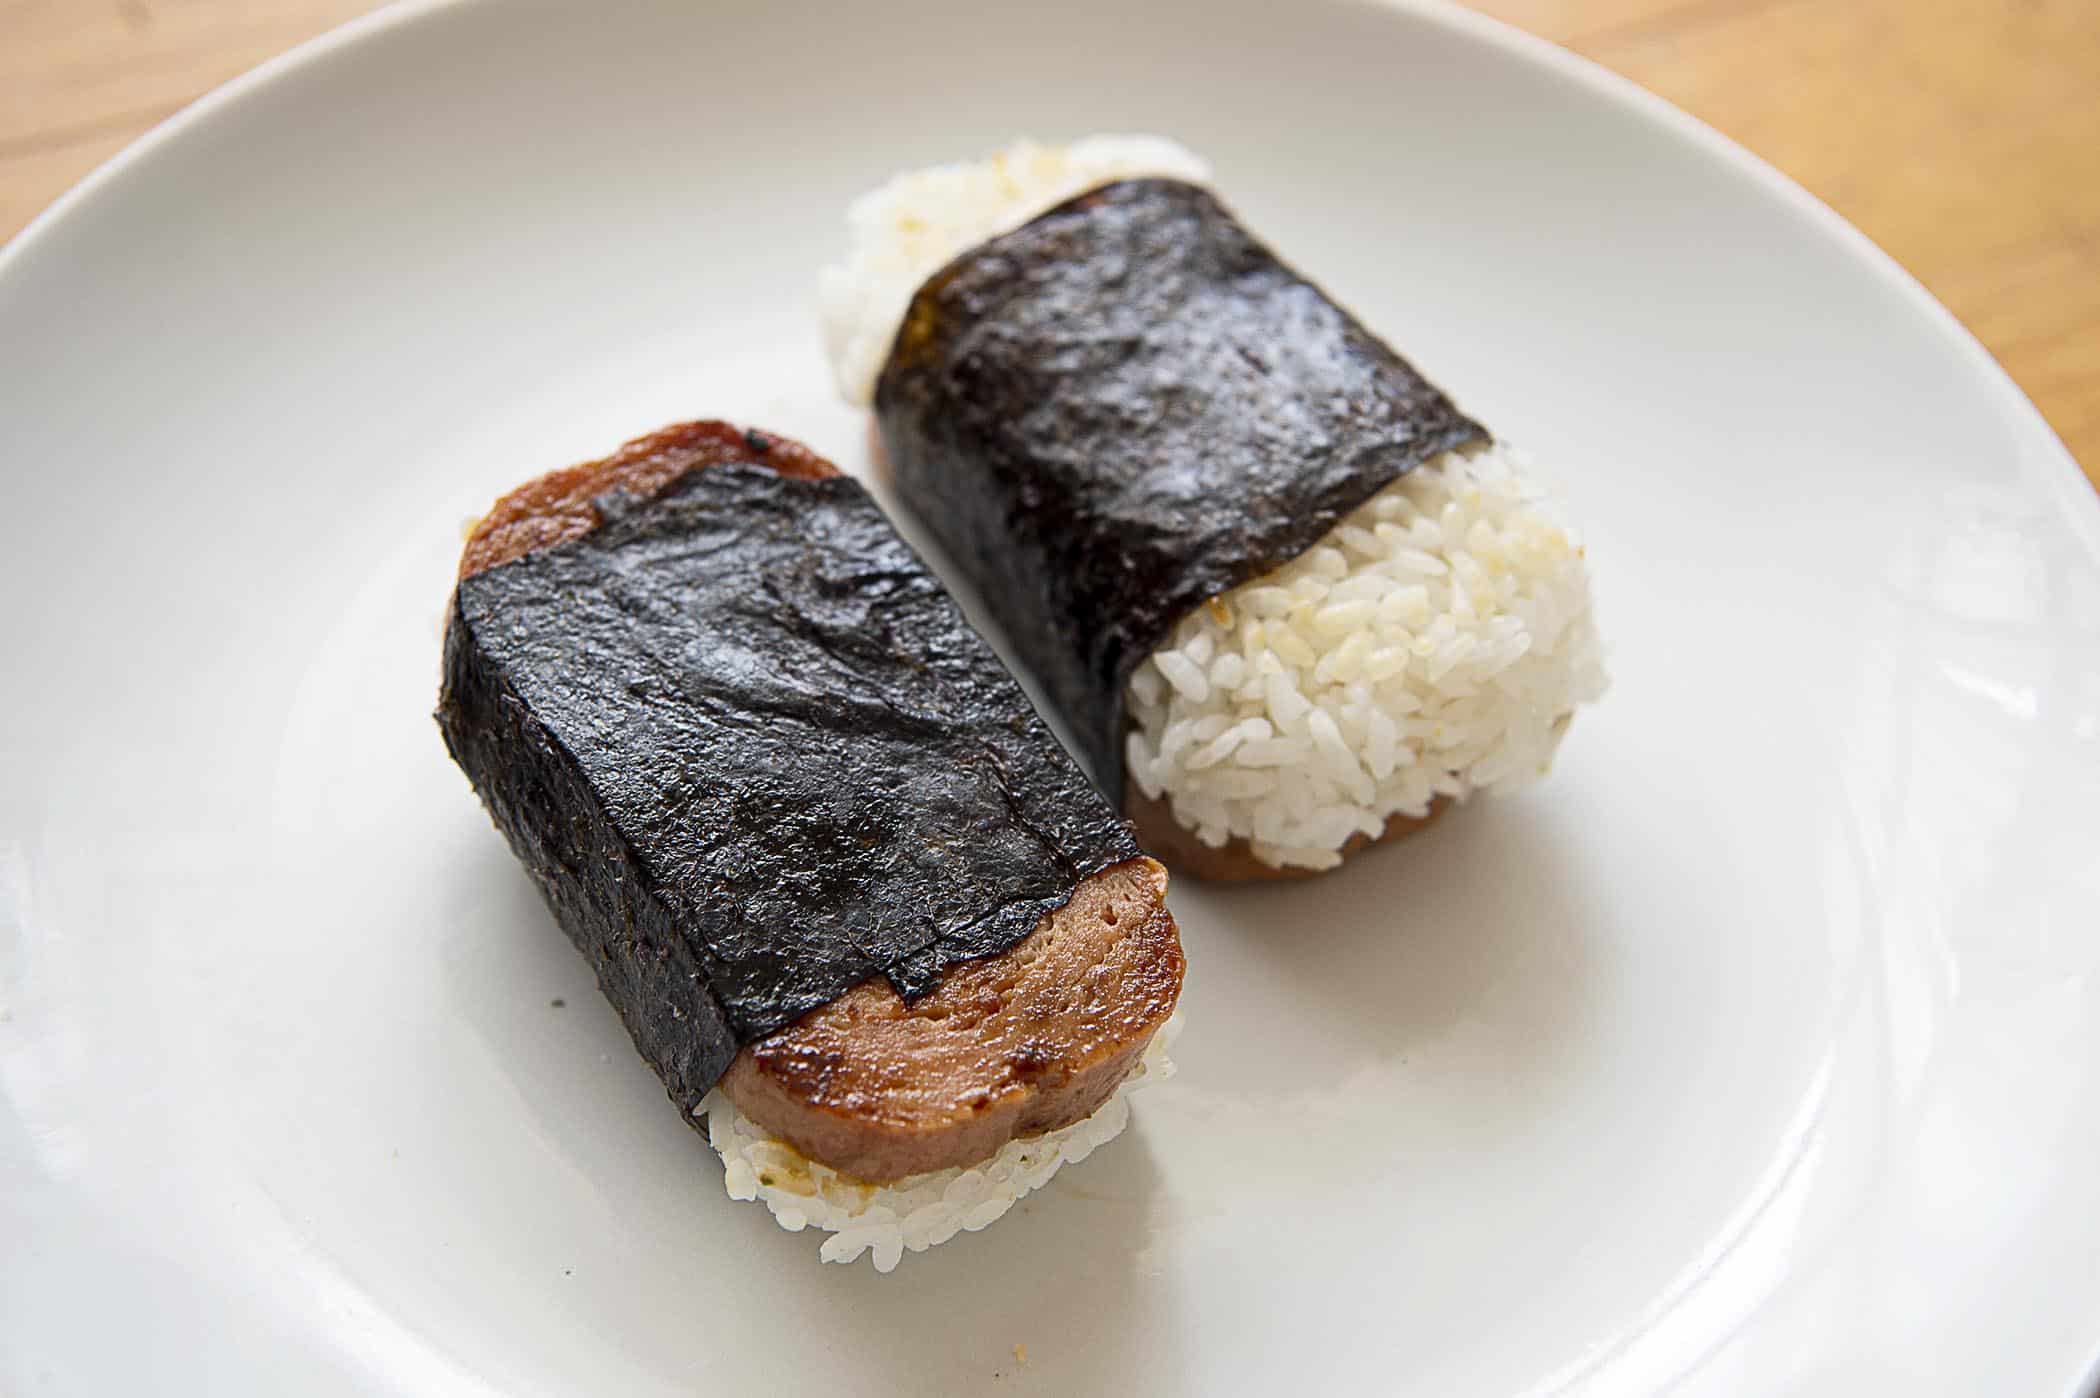 Two Spam musubis on a white plate